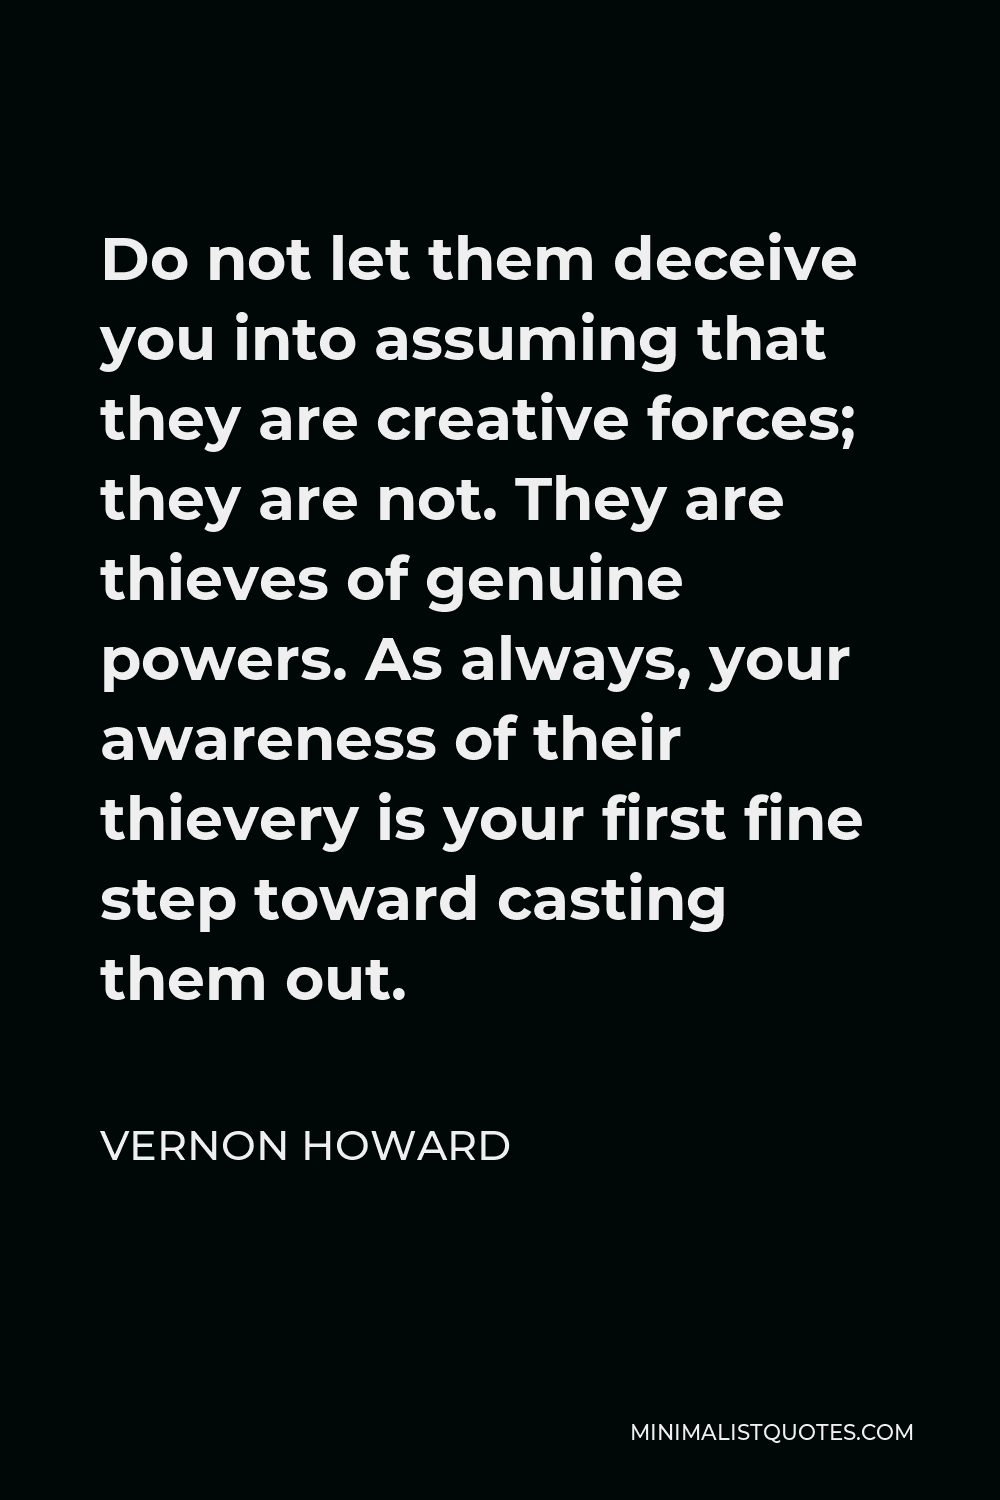 Vernon Howard Quote - Do not let them deceive you into assuming that they are creative forces; they are not. They are thieves of genuine powers. As always, your awareness of their thievery is your first fine step toward casting them out.